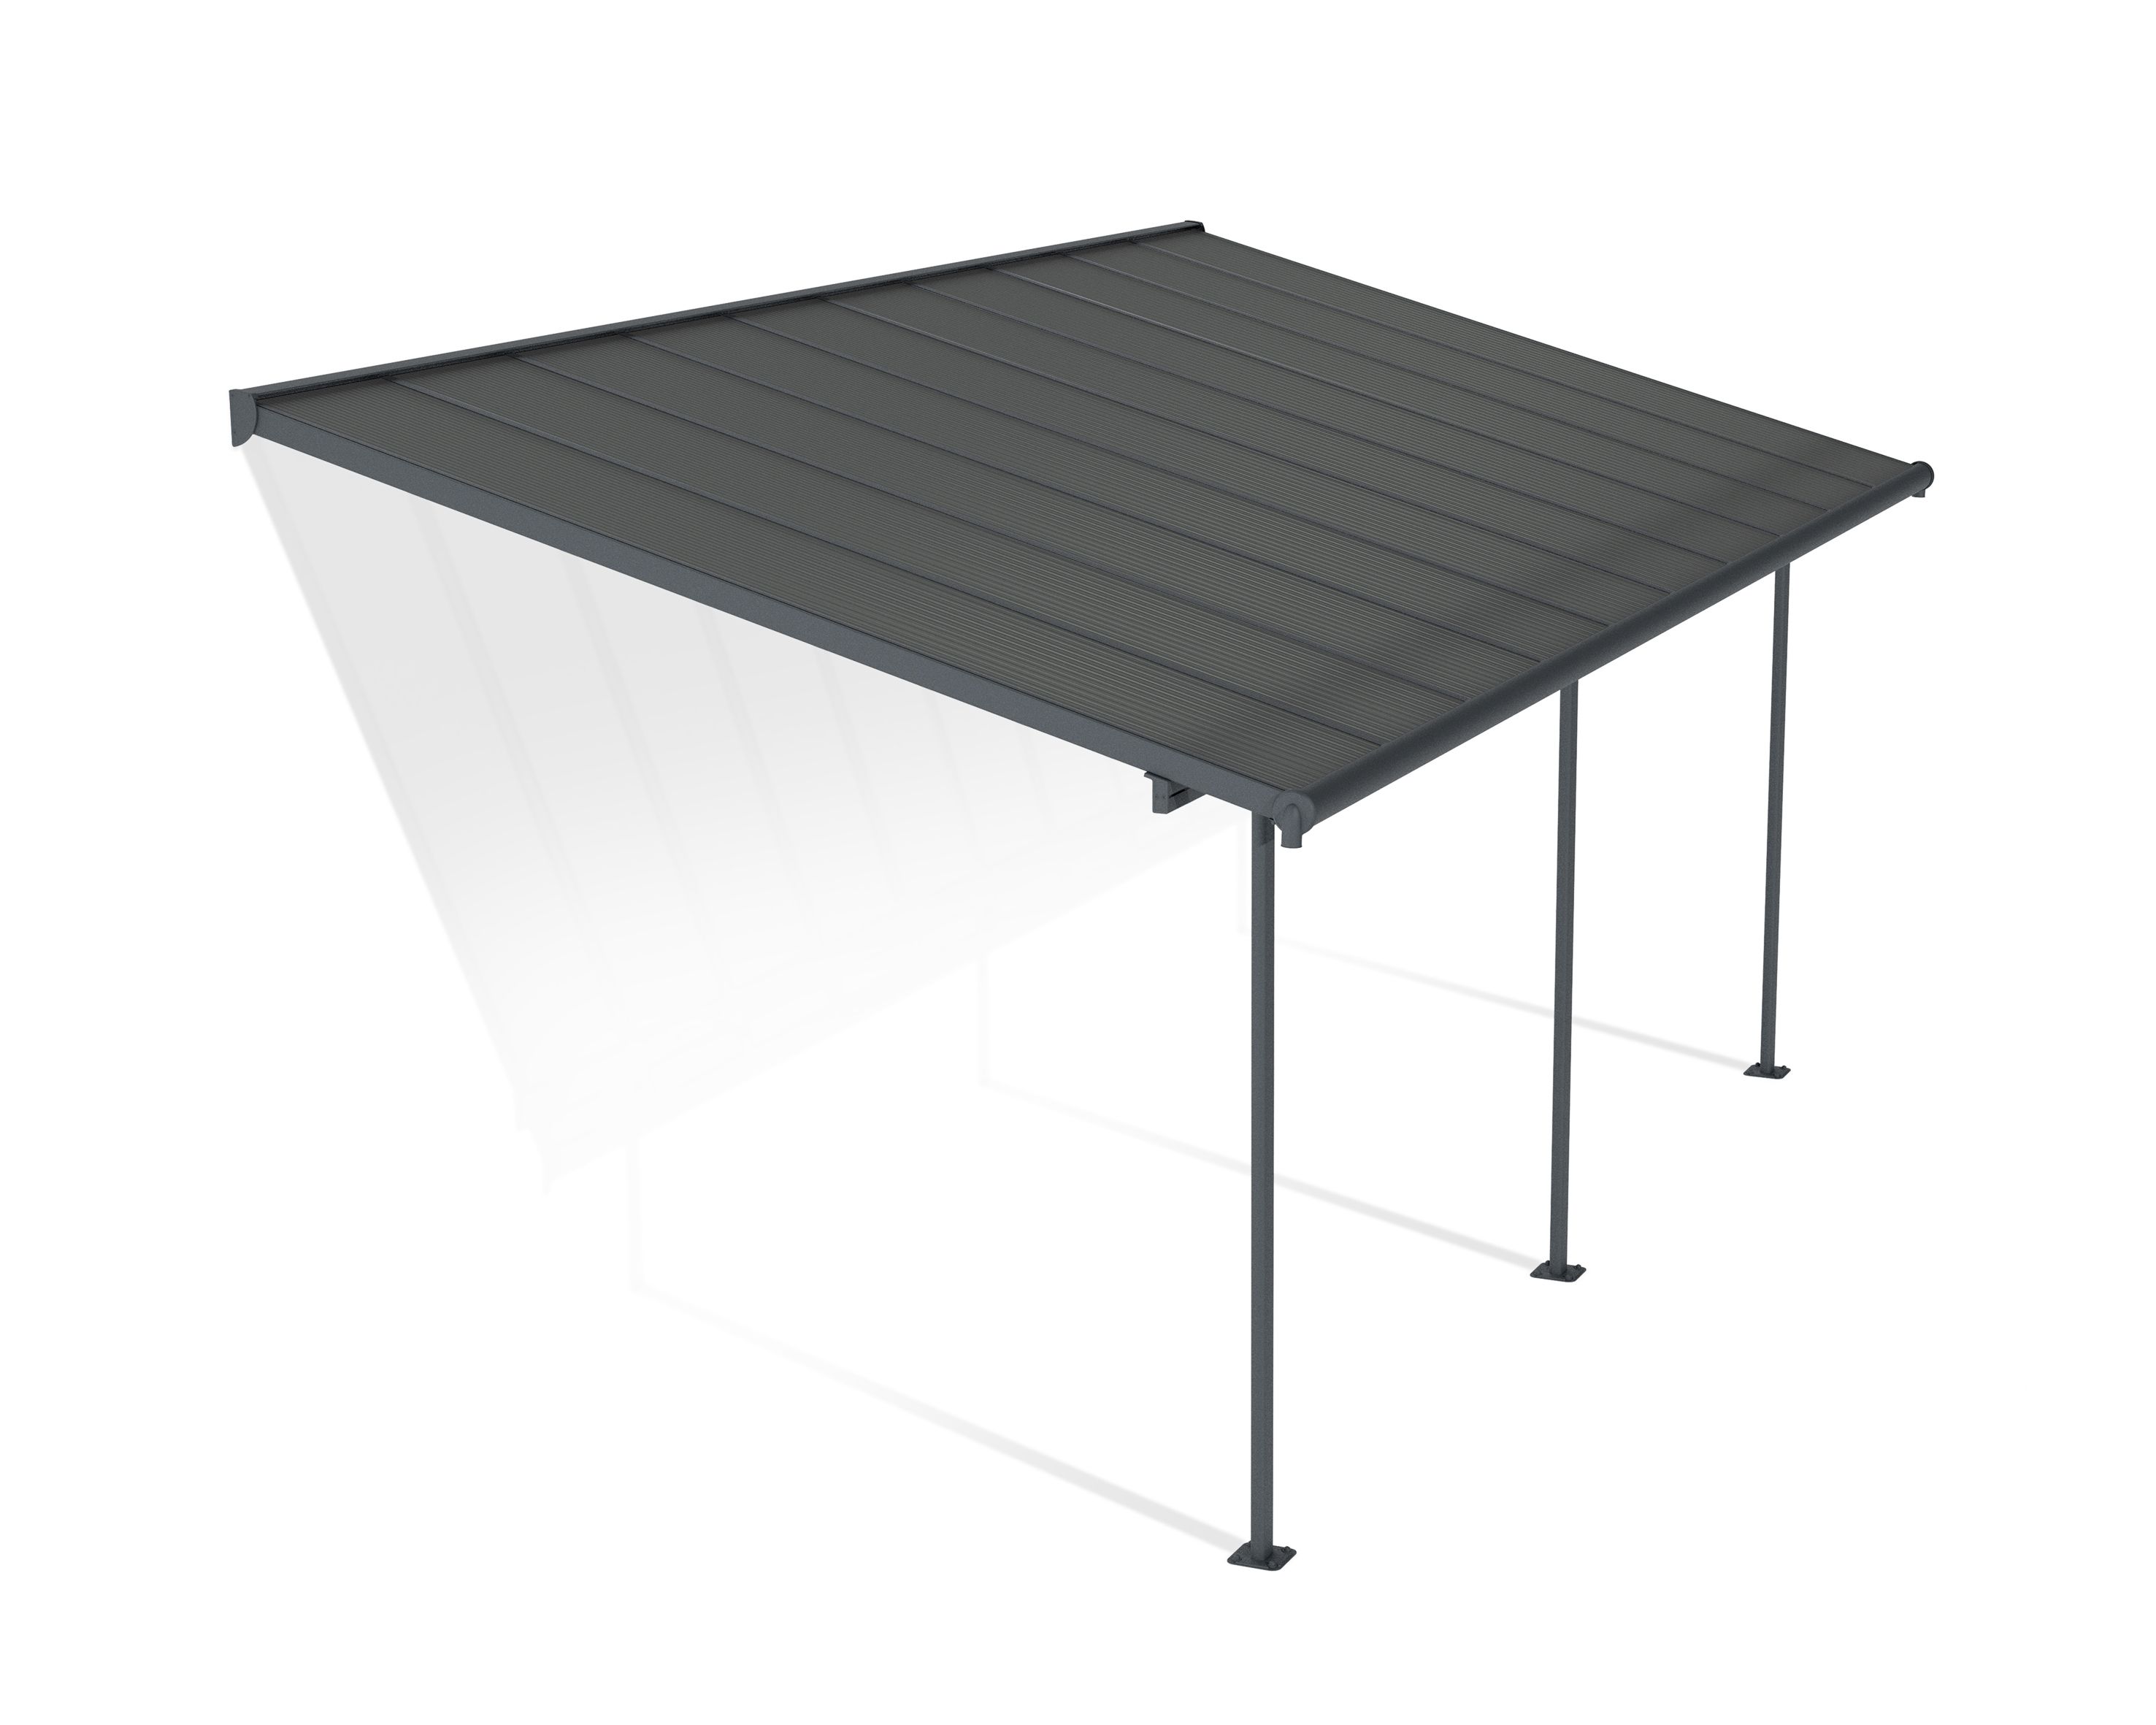 CANOPIA by PALRAM HG9079 10 x 20 ft. Sierra Patio Cover - Gray & Bronze